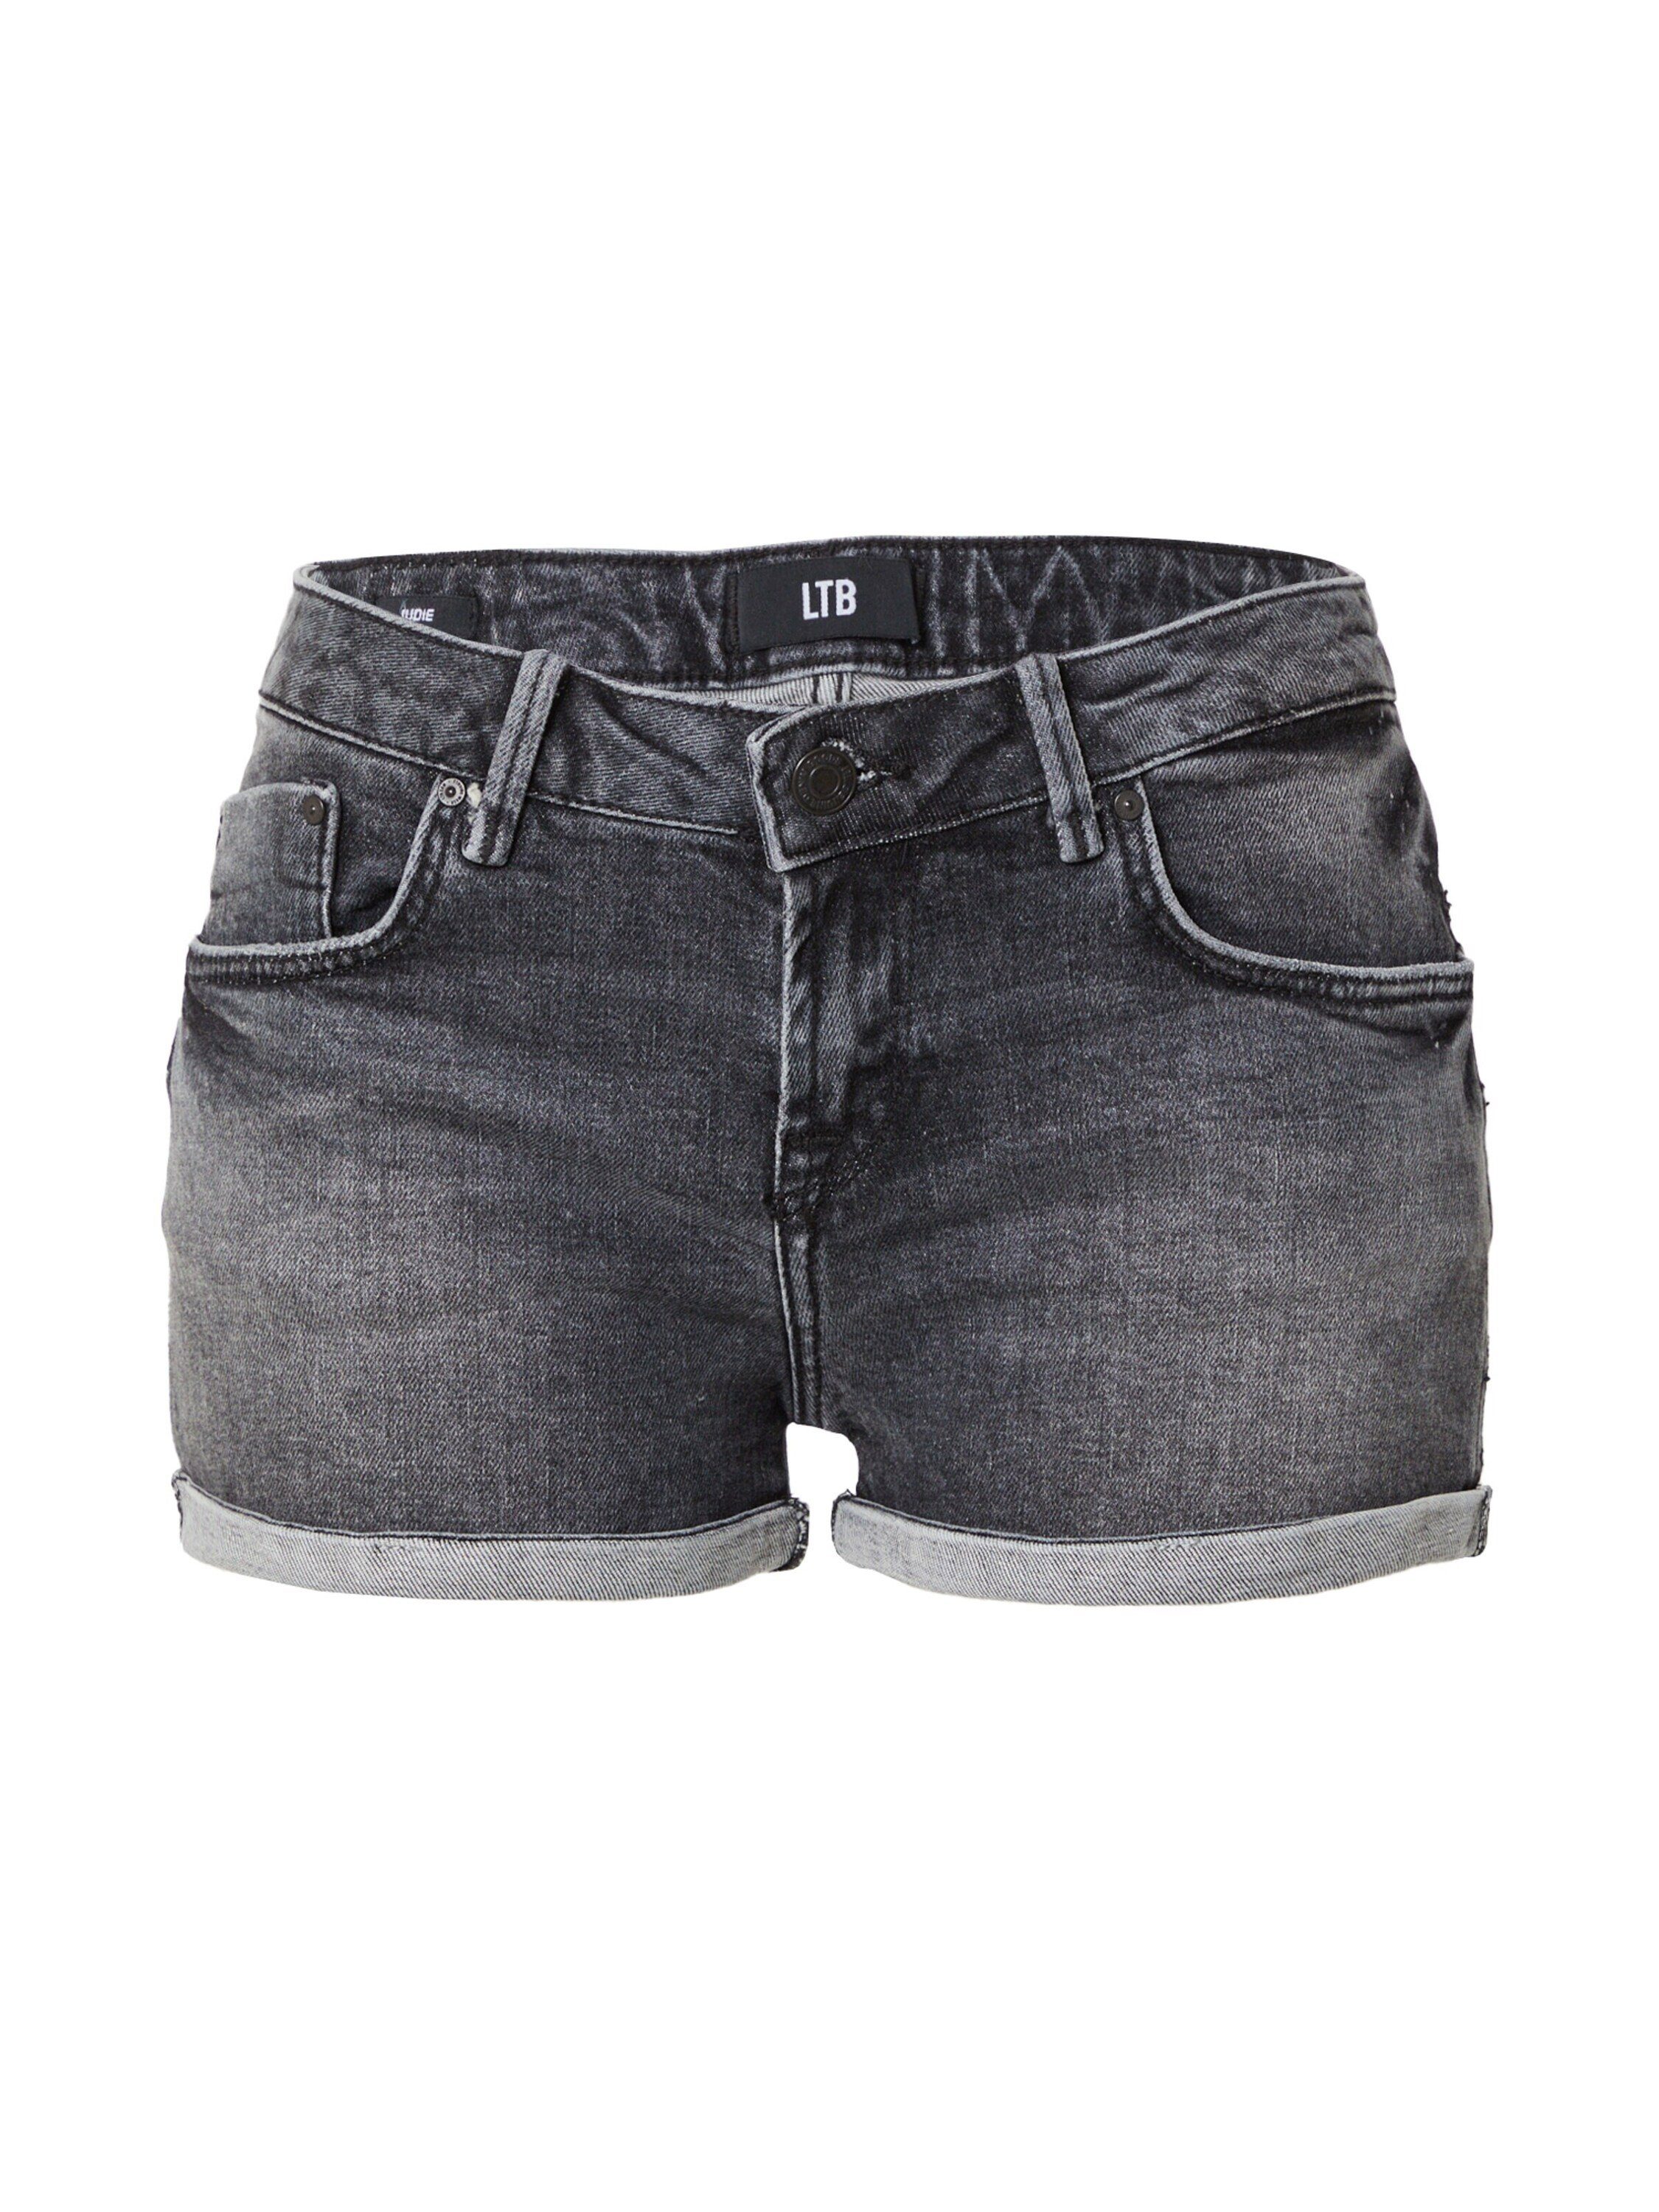 Weiteres Judie Patches, Jeansshorts (1-tlg) LTB Detail